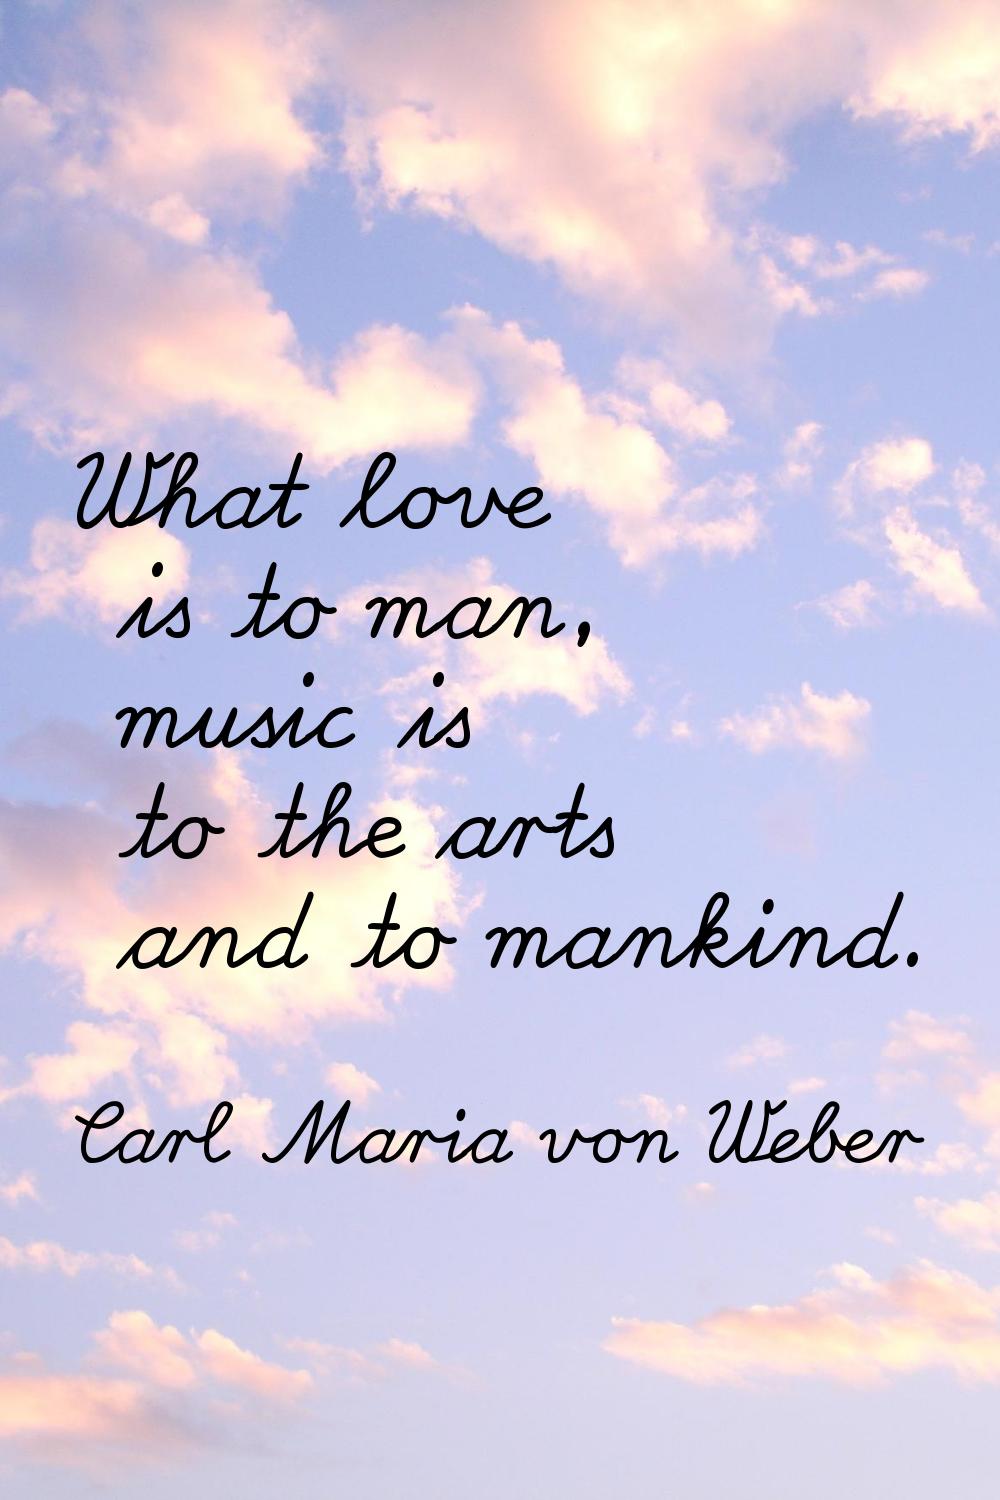 What love is to man, music is to the arts and to mankind.